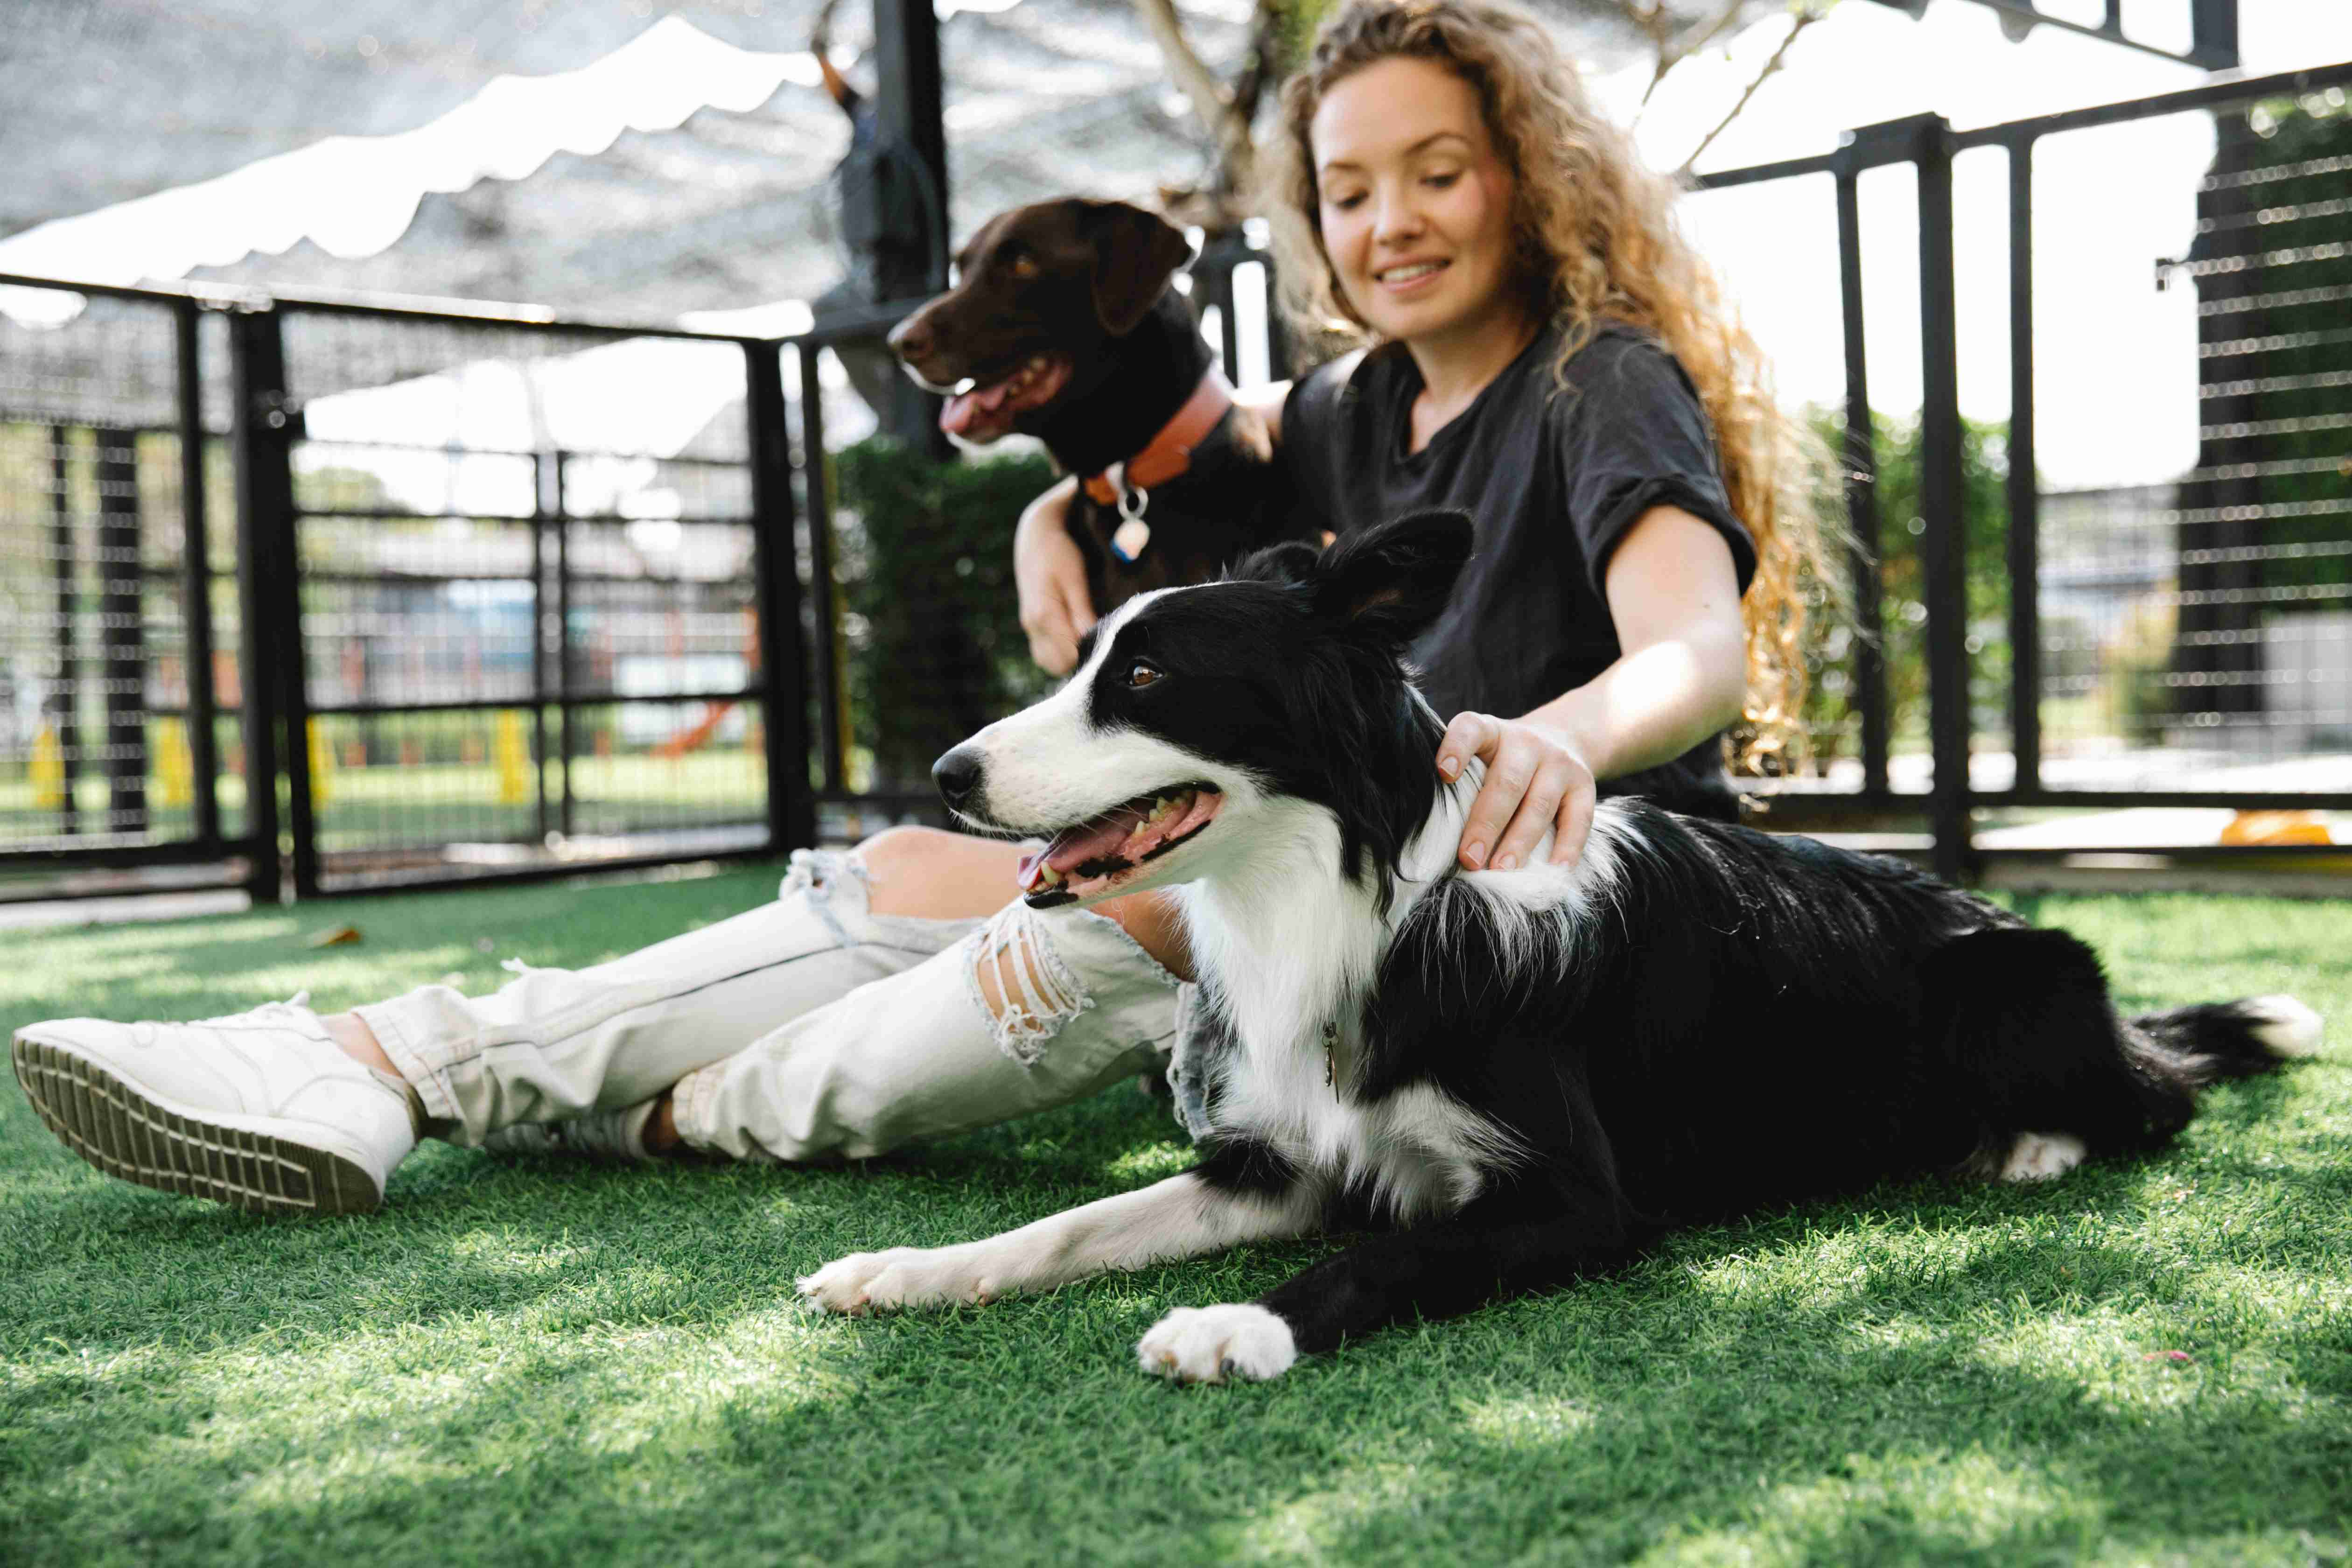 Border Collie Training: Tips and Tricks for Helping Your Dog Socialize with New Canine Friends